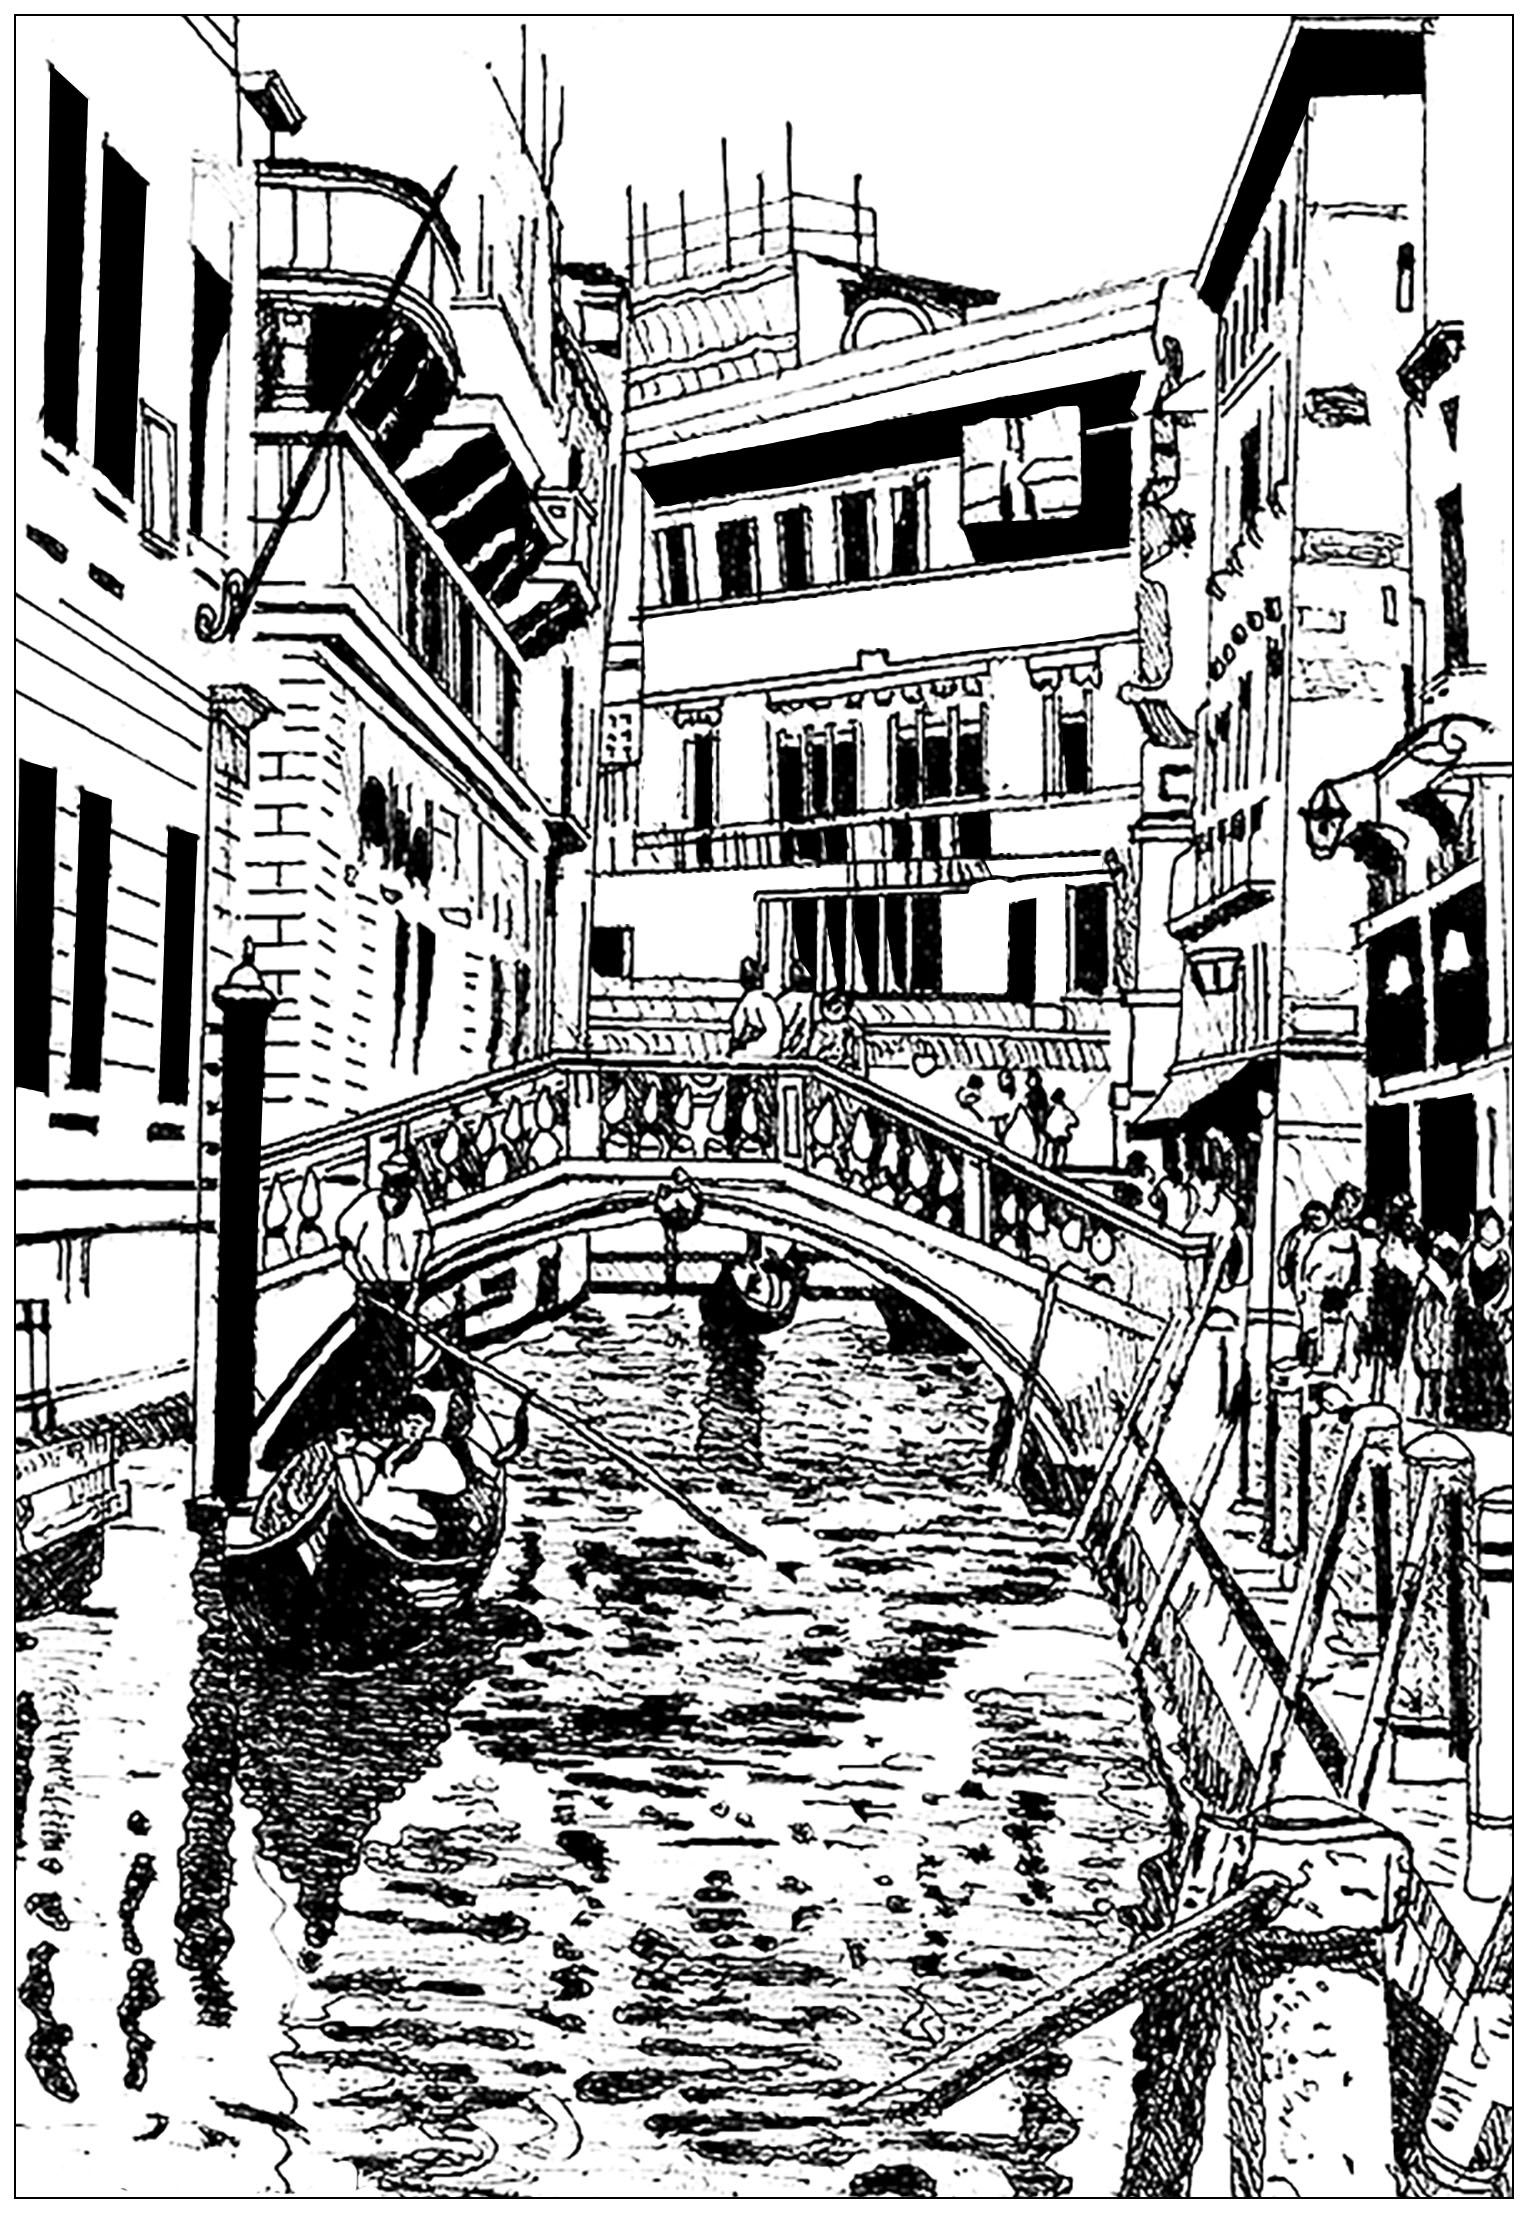 Venice drawing - Architecture, Cities & Houses Adult Coloring Pages